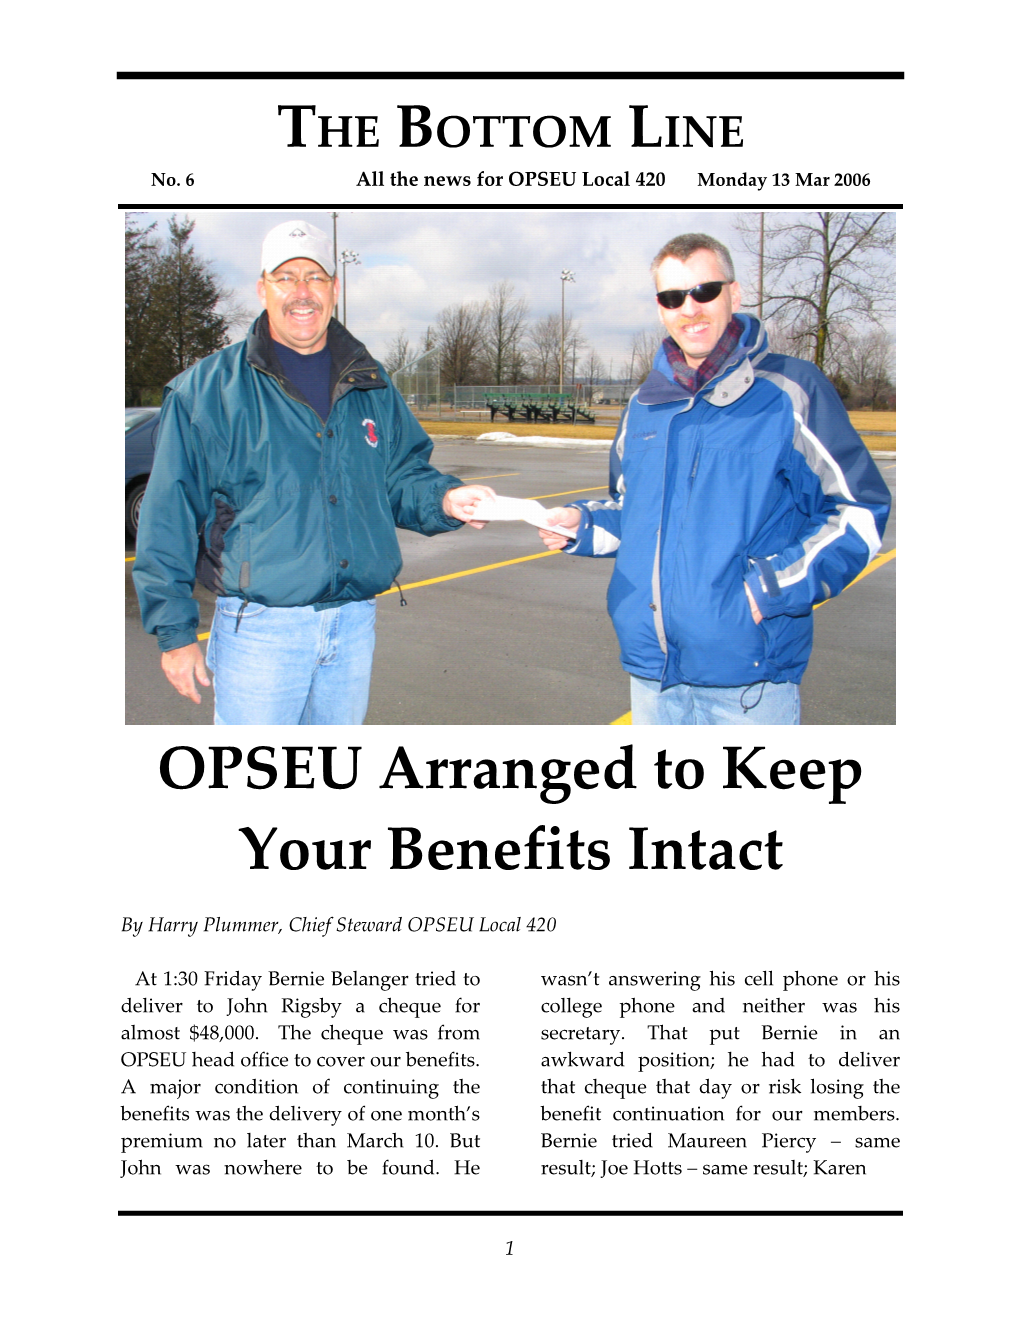 No. 6All the News for OPSEU Local 420Monday13 Mar 2006